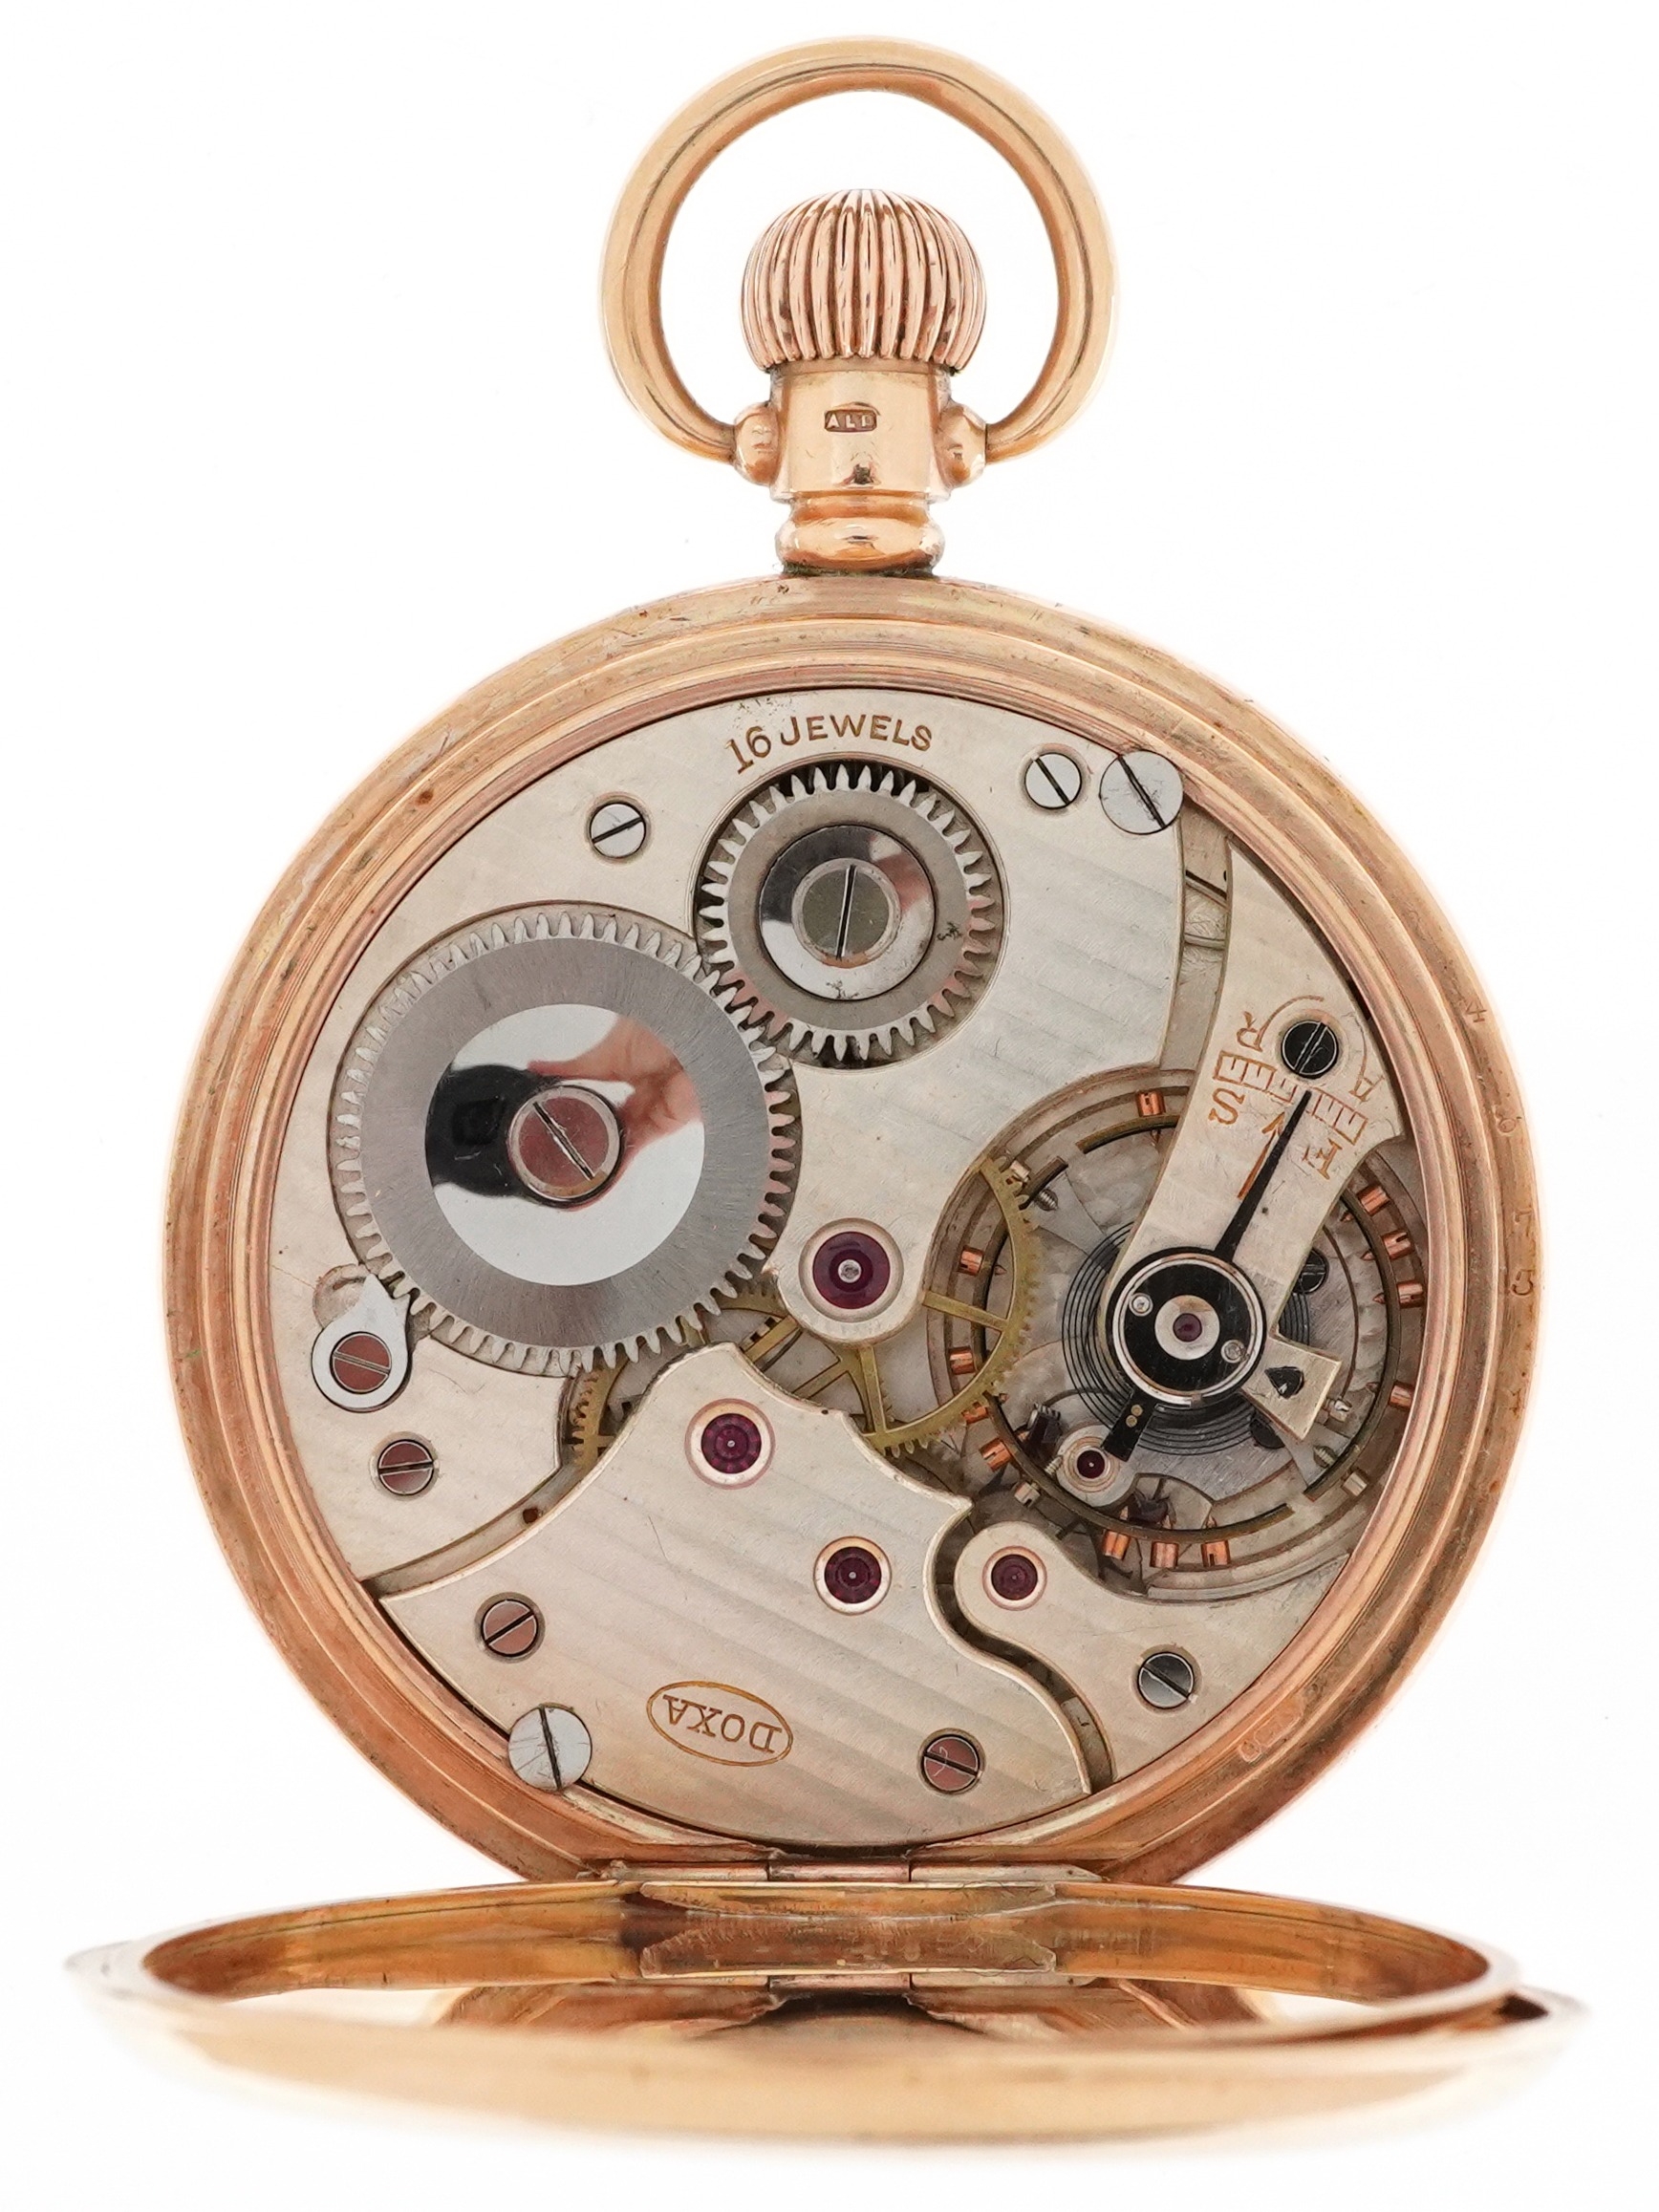 Doxa, gentlemen's 9ct gold open face keyless pocket watch having enamelled and subsidiary dials with - Image 4 of 8